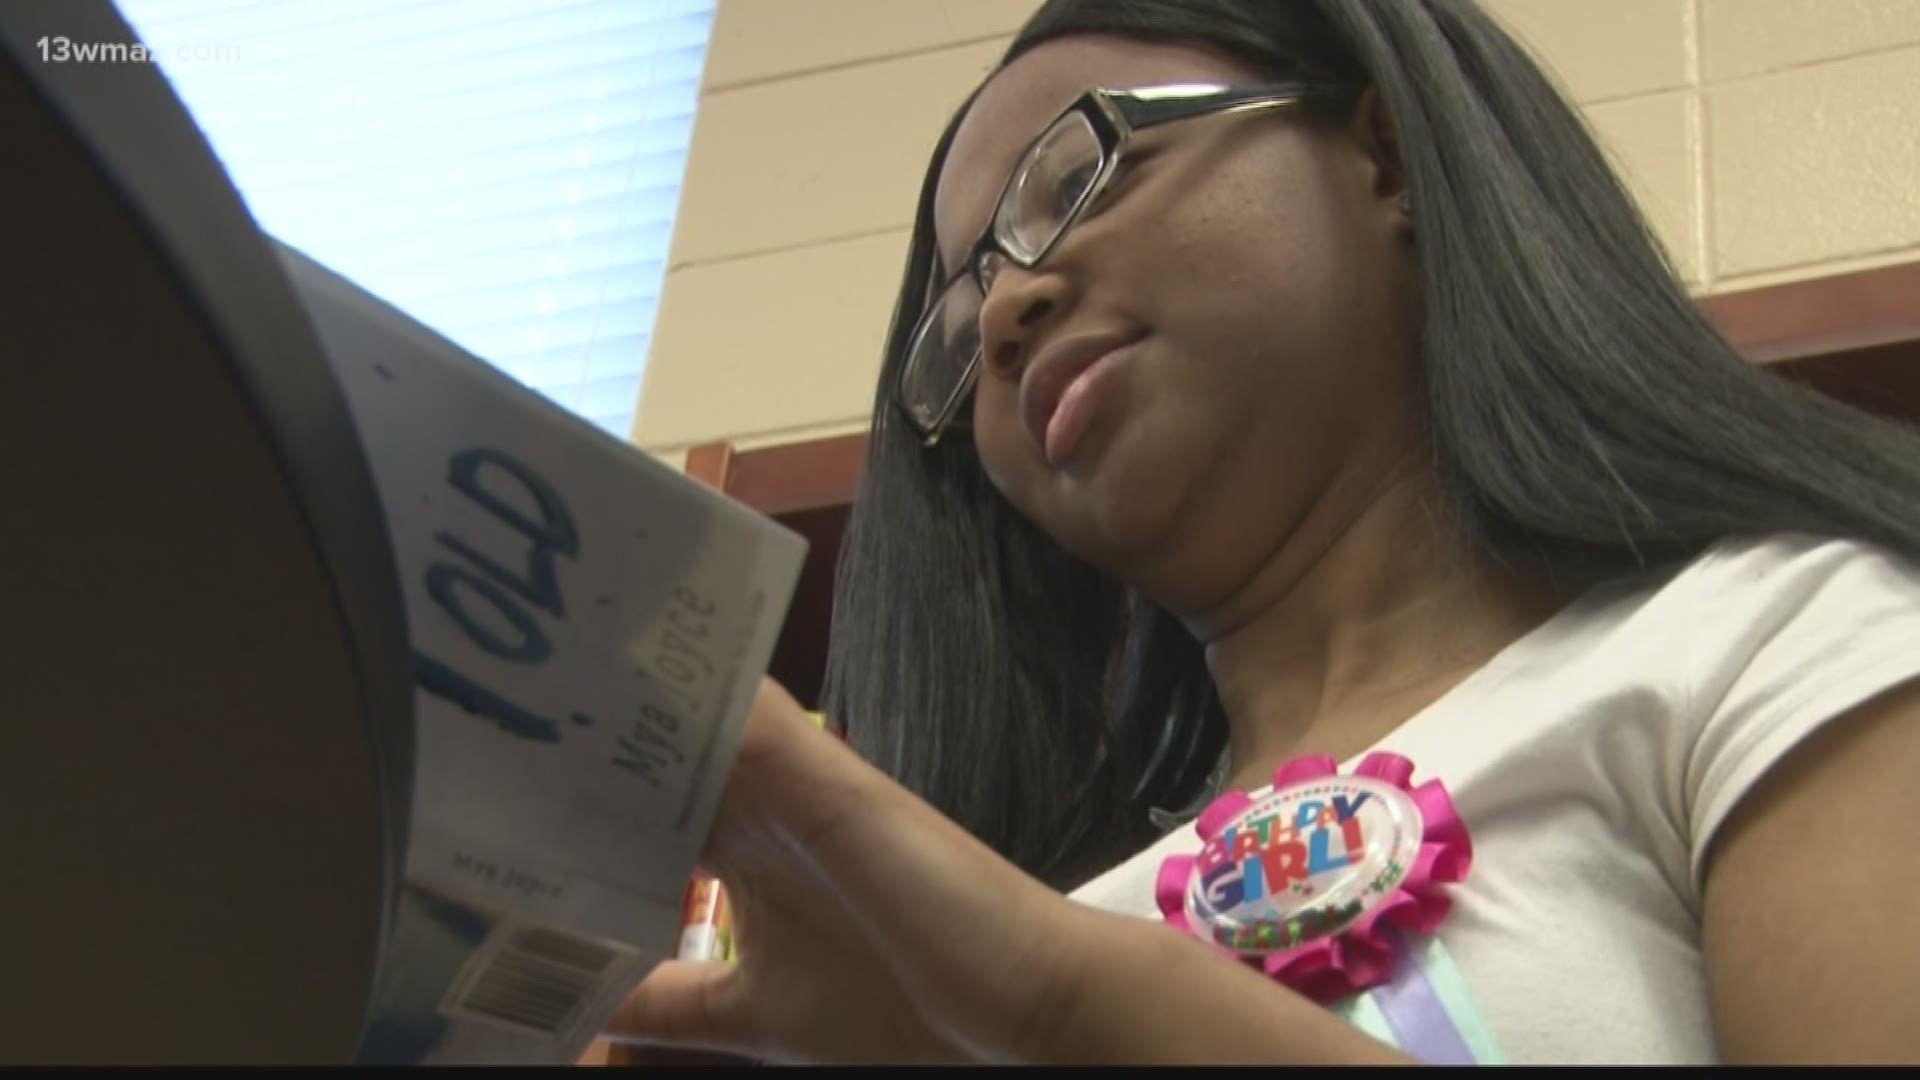 A Central High School student wrote a book about growing up with substance abuse in her family and being in foster care. Mya Joyce hopes her story helps other teens.